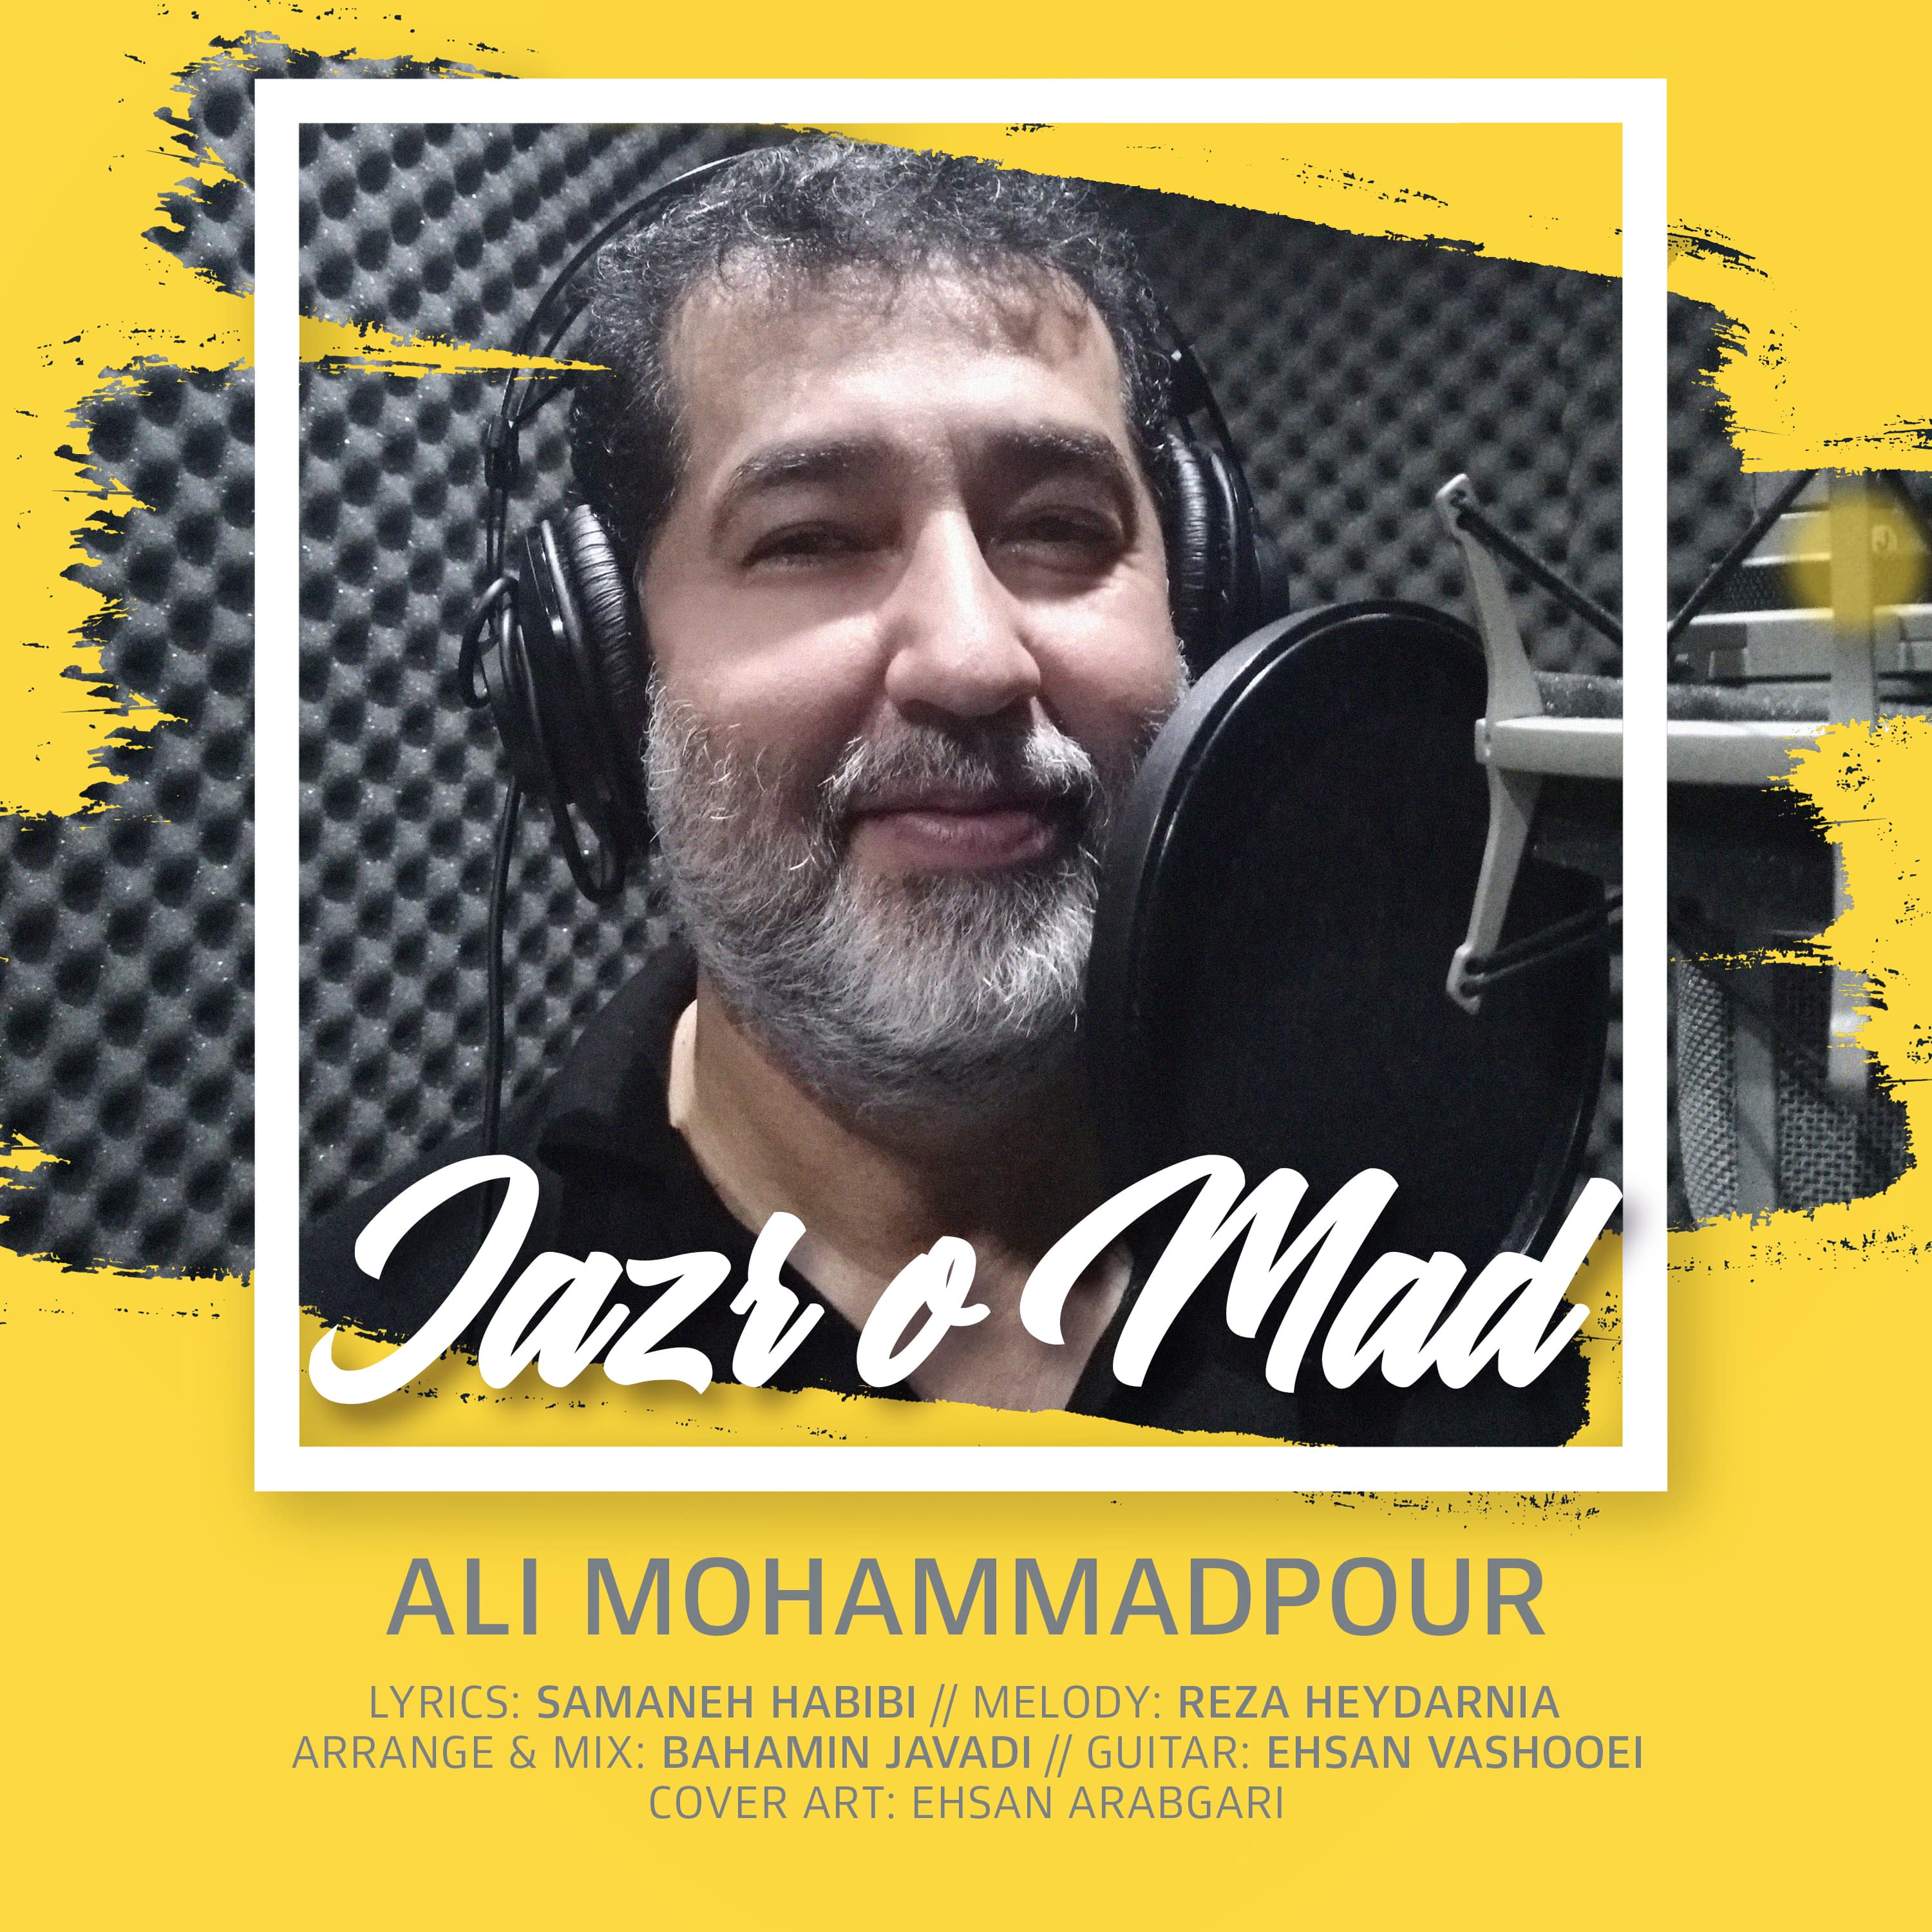 Ali Mohammad Pour Jazr o Mad 